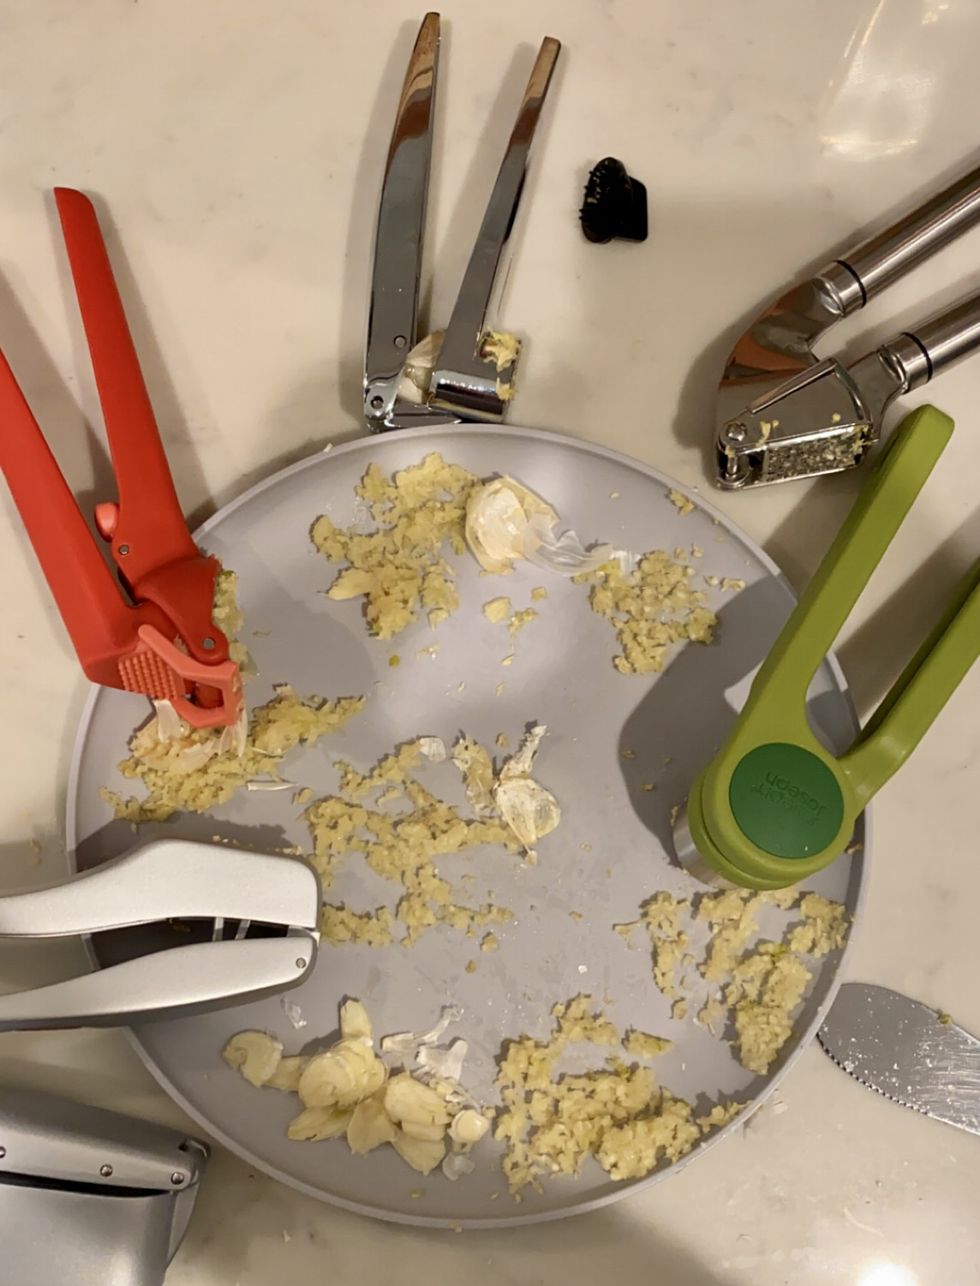 This  Garlic Chopper Is $22 And Has High Reviews